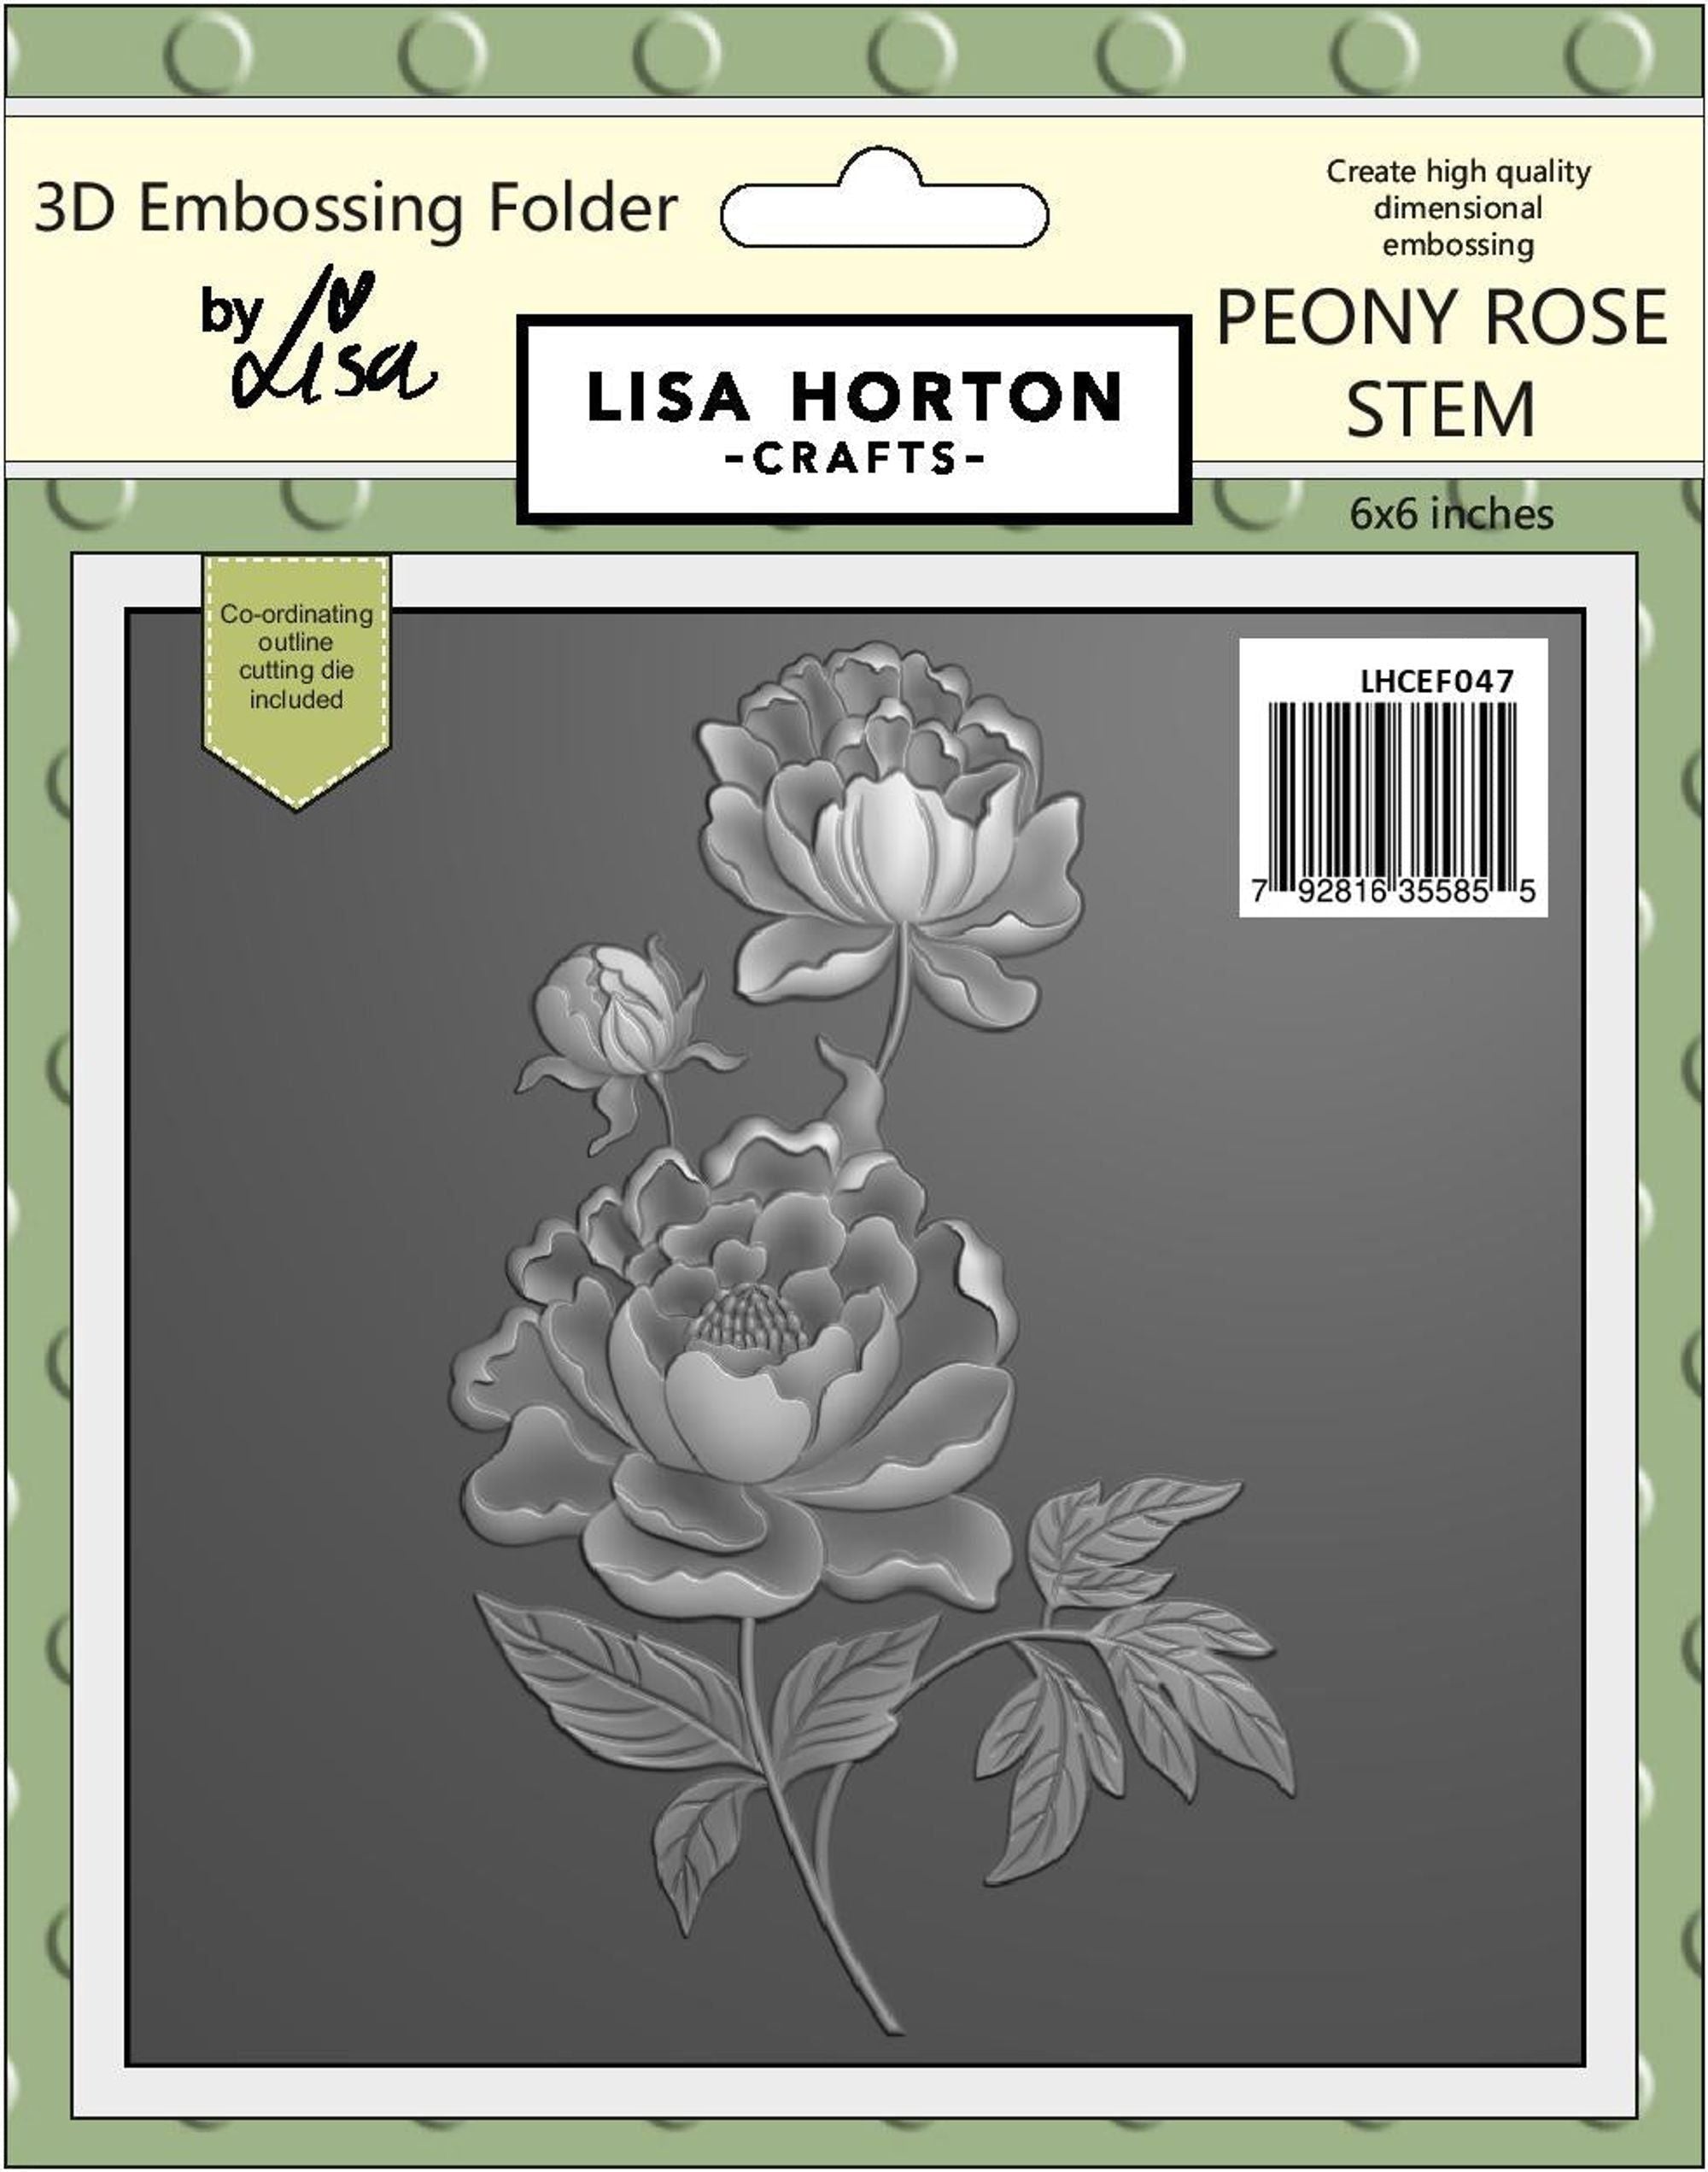 Peony Rose Stem 6x6 3D Embossing Folder With Cutting Die